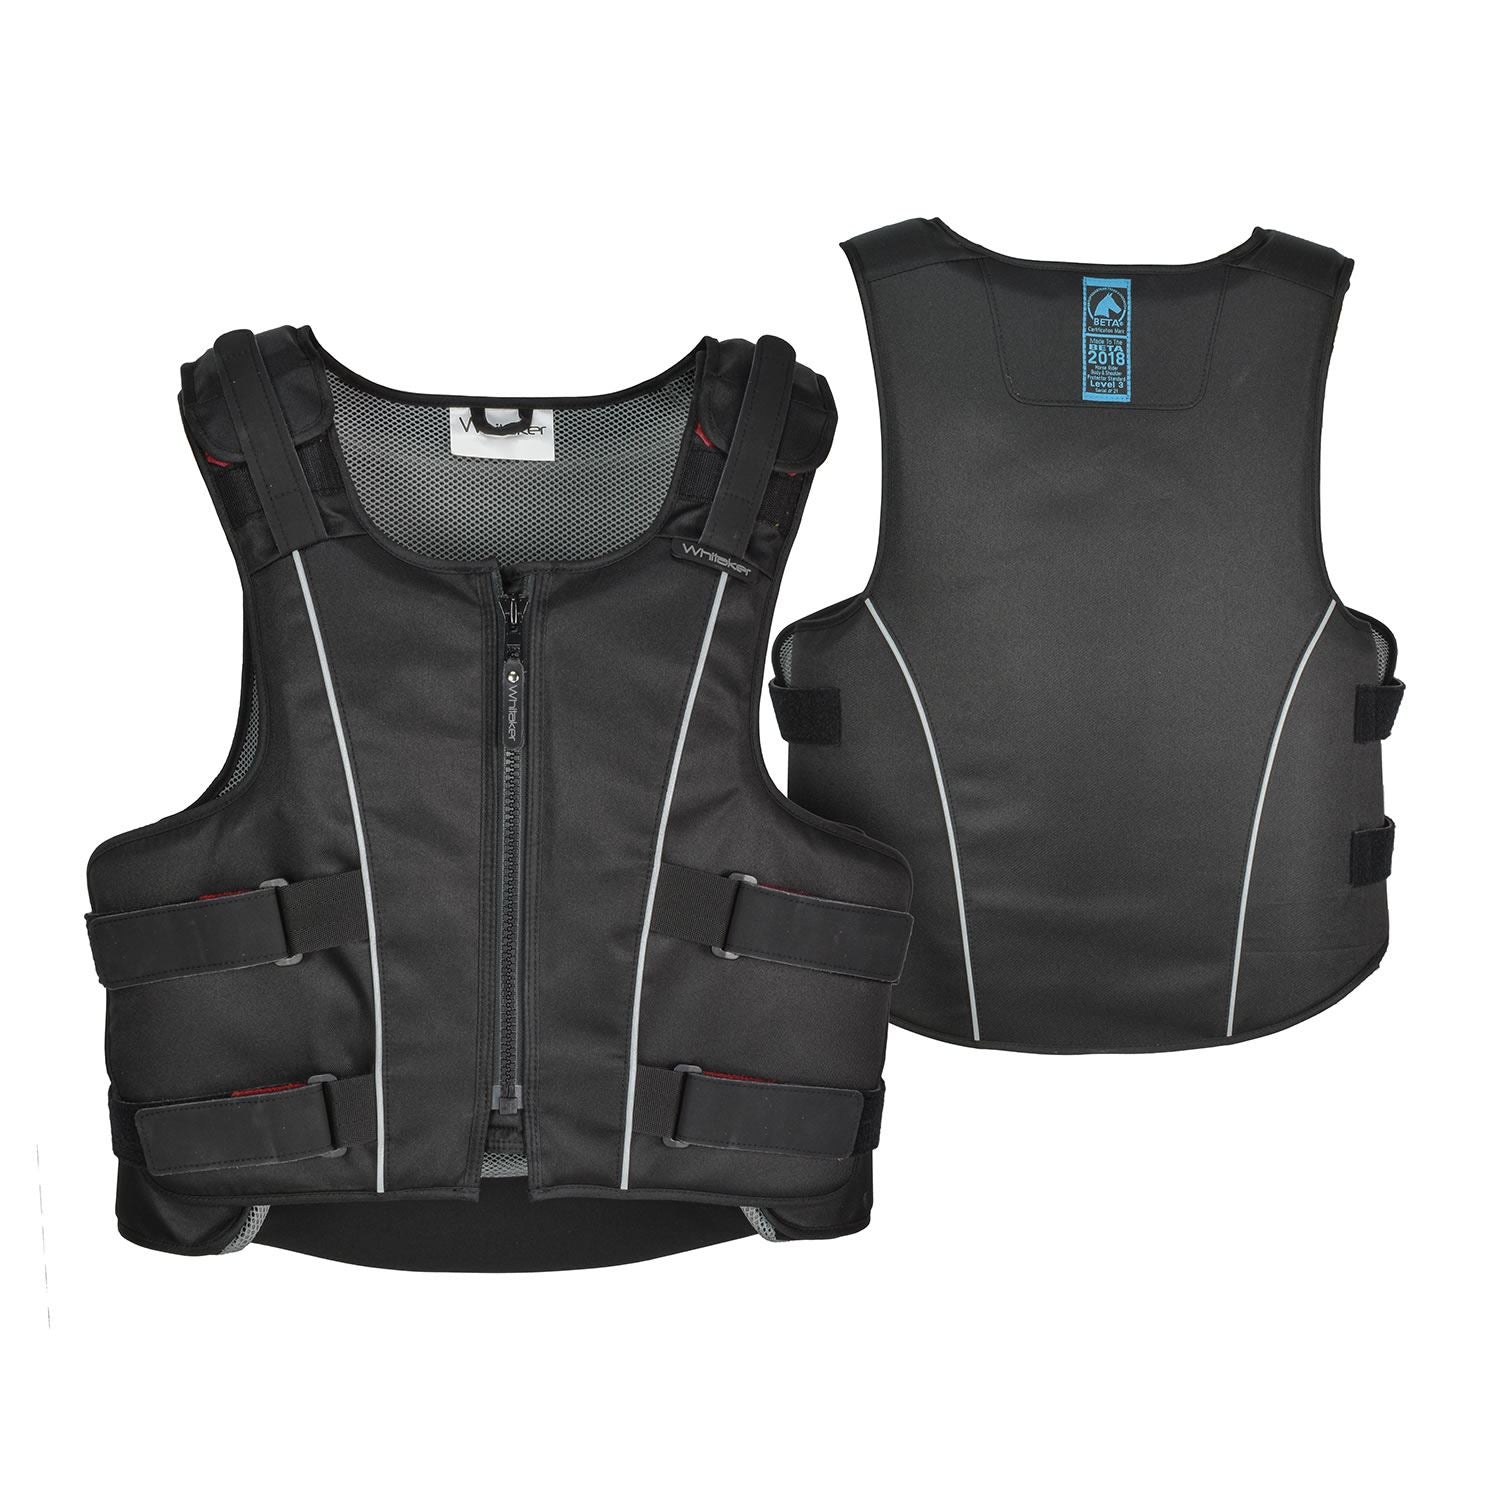 Whitaker Pro Body Protector - Just Horse Riders